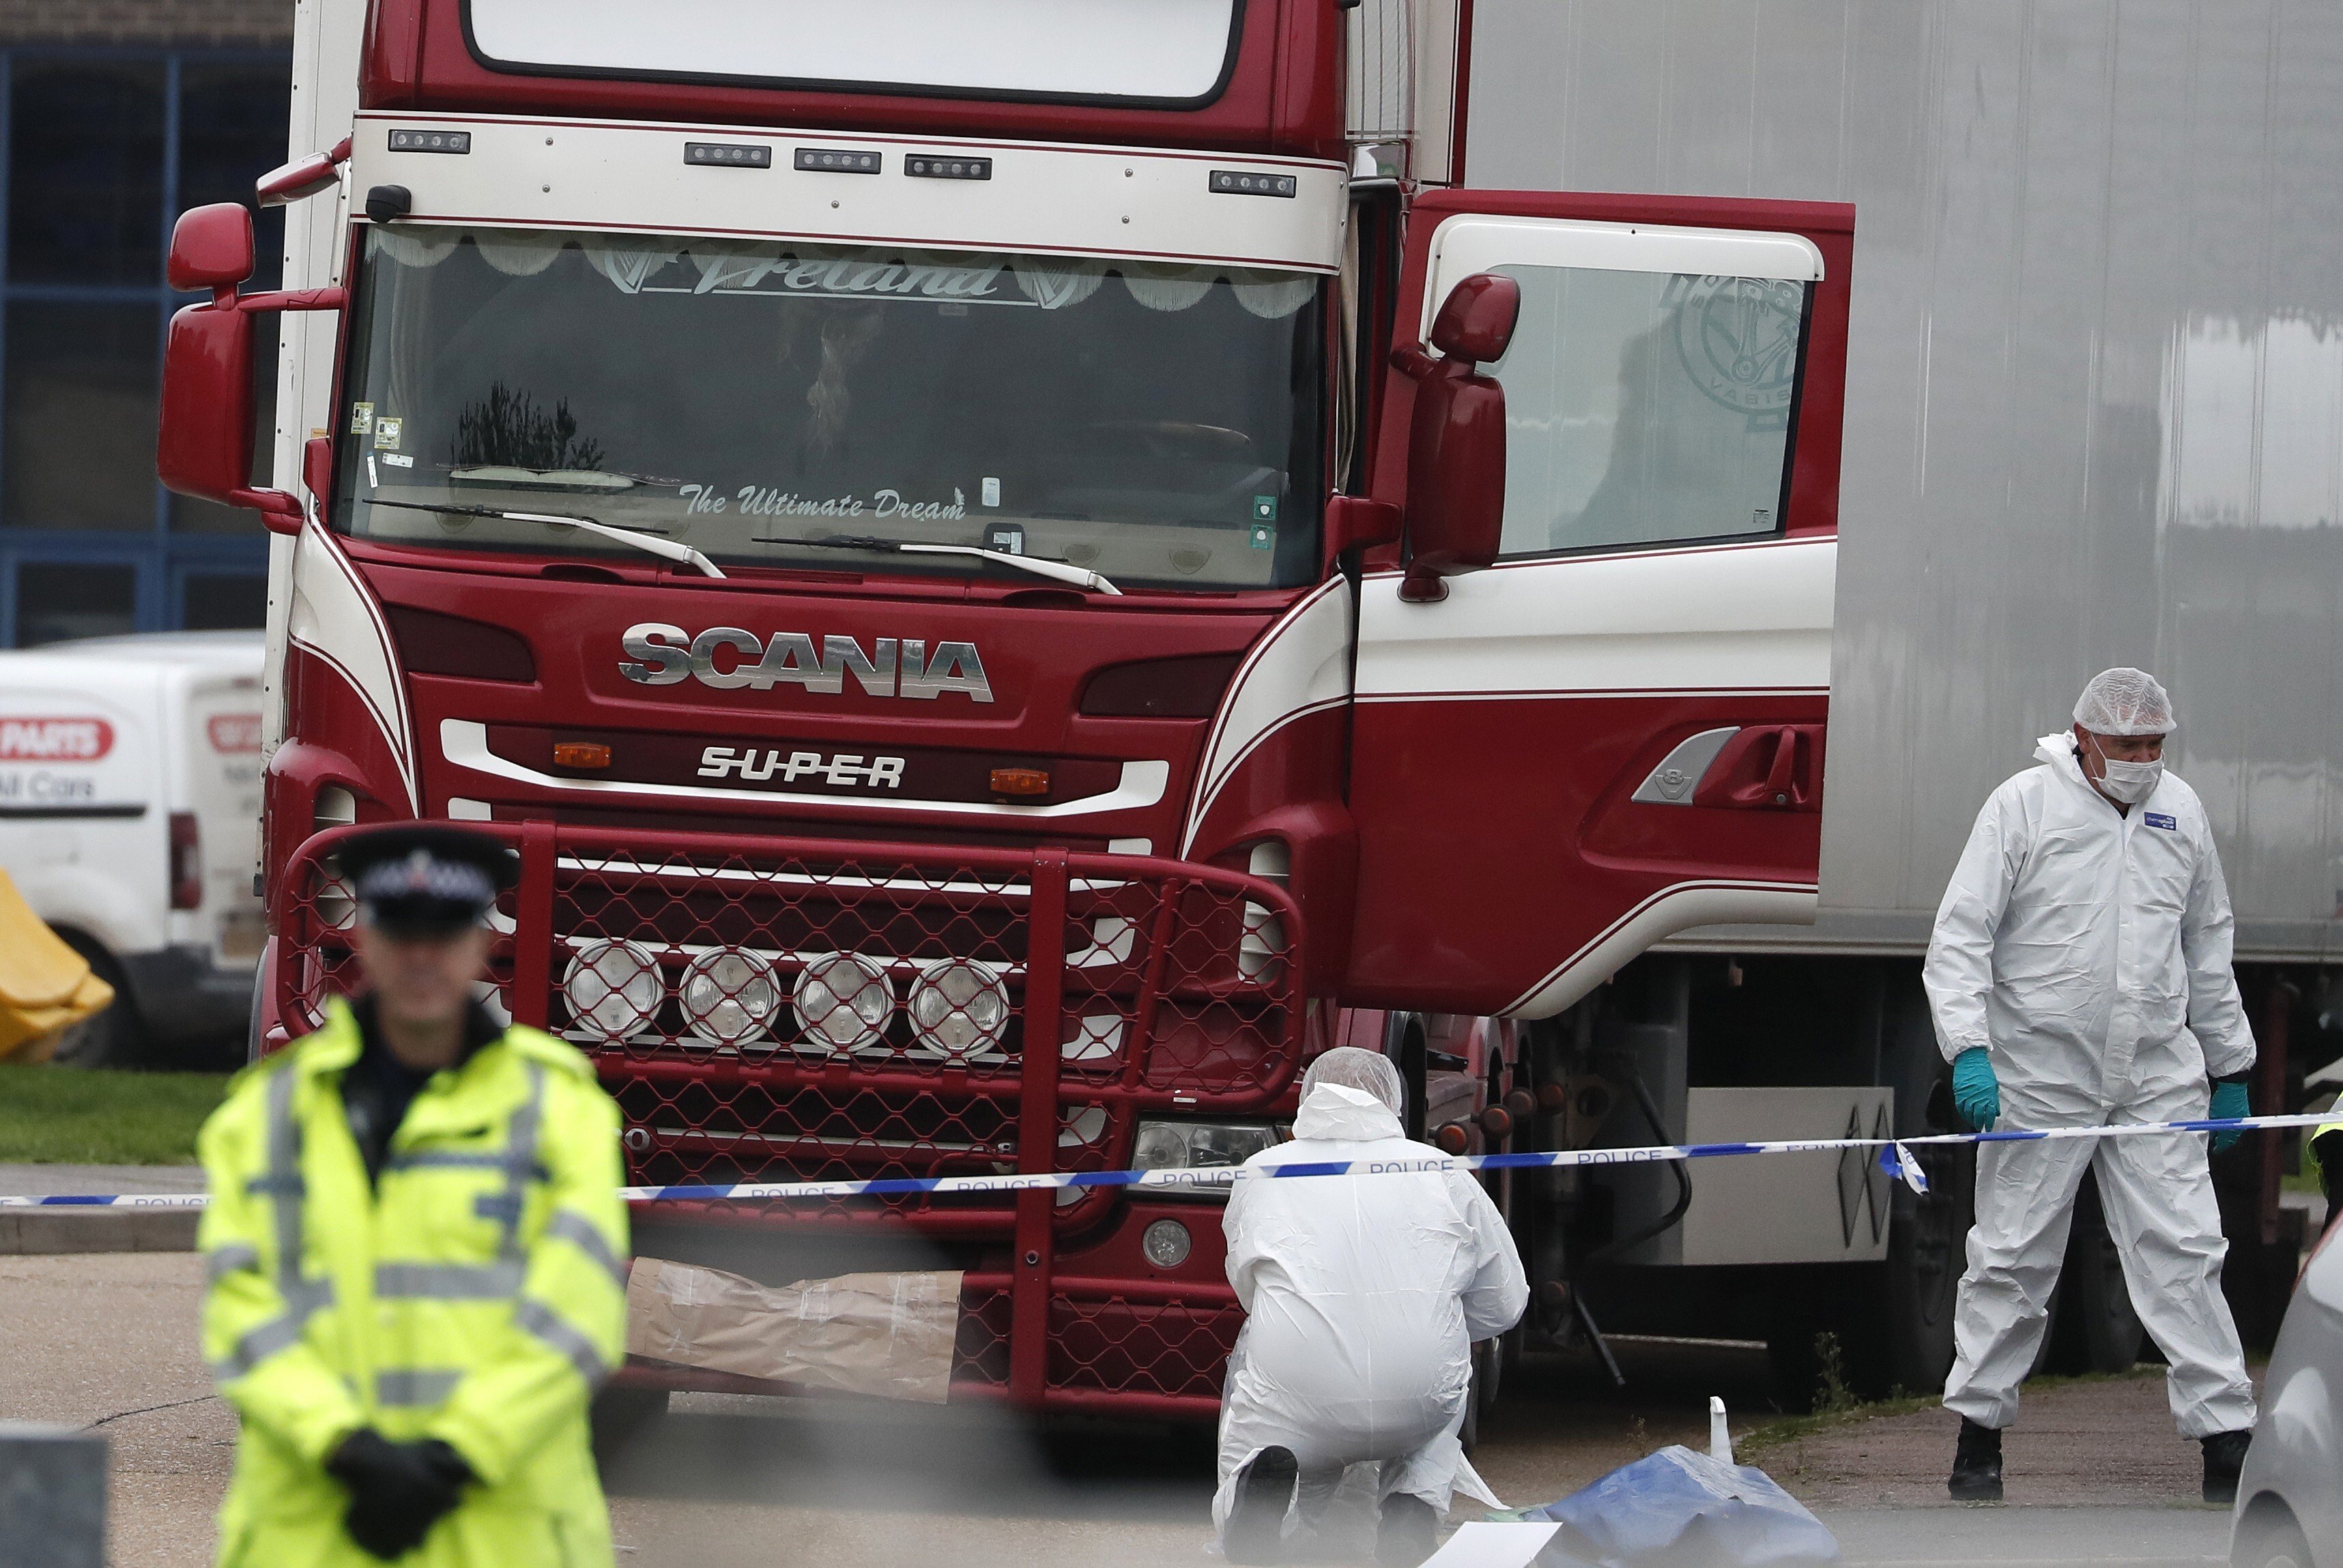 Police officers at the scene after the truck was found. Photo: AP